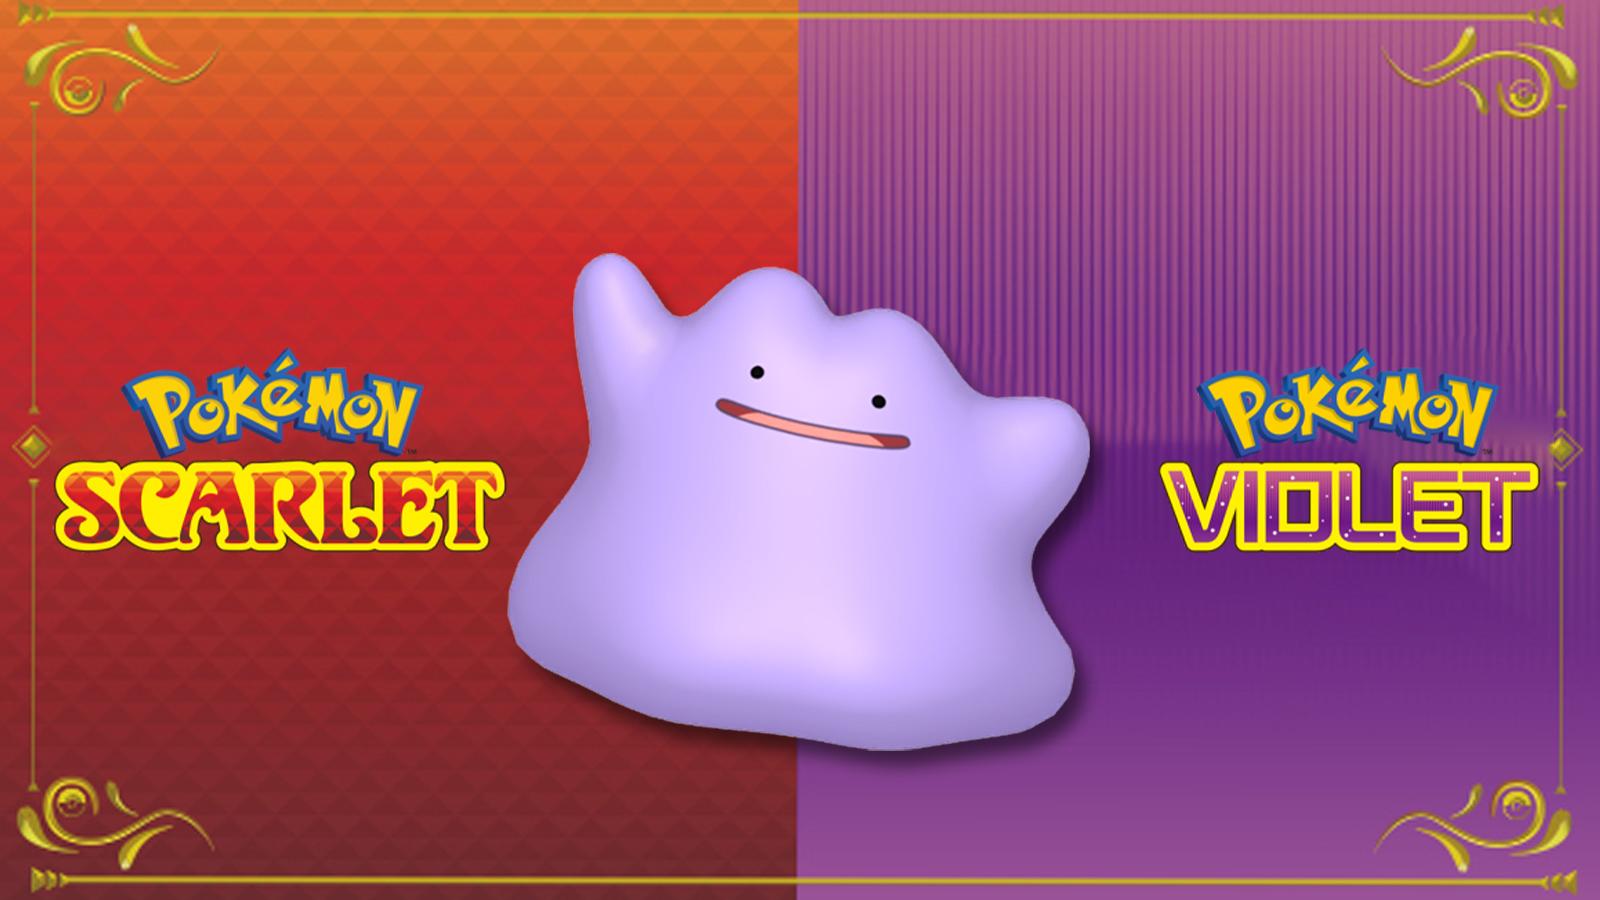 How to get Ditto in Pokemon Scarlet and Violet